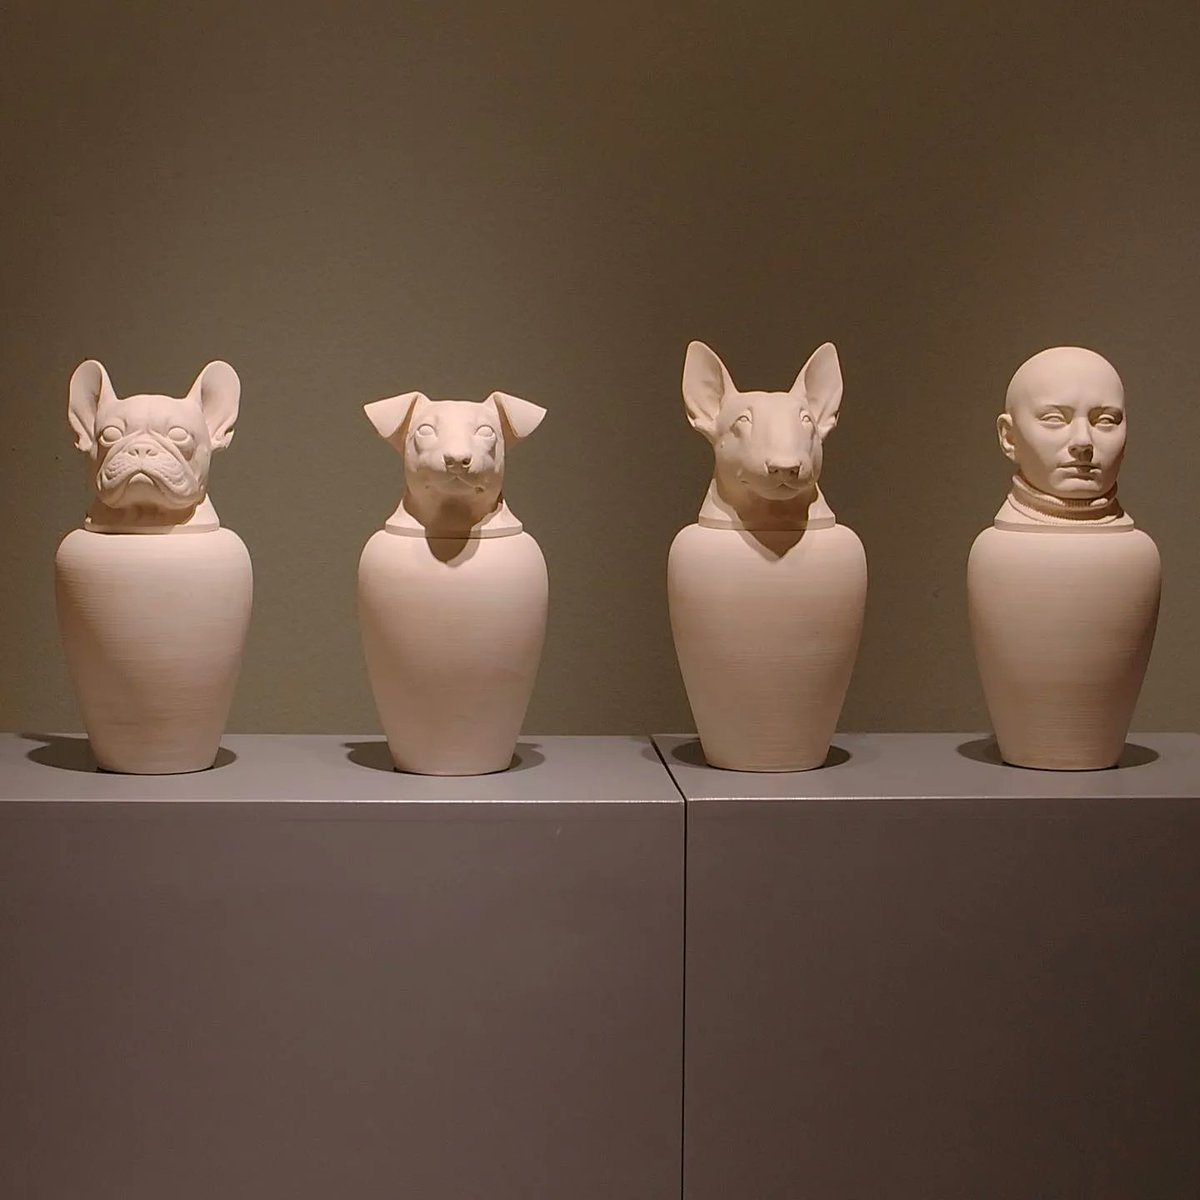 The “Canopic Jars” by Barcelona-based sculptor Gerard Mas are a great twist on the ancient Egyptian originals! Which is your favourite?

#beautifulbizarre #gerardmas #sculptor #sculpturelover #contemporarysculpture #contemporaryart #canopicjars #sculptureinspo